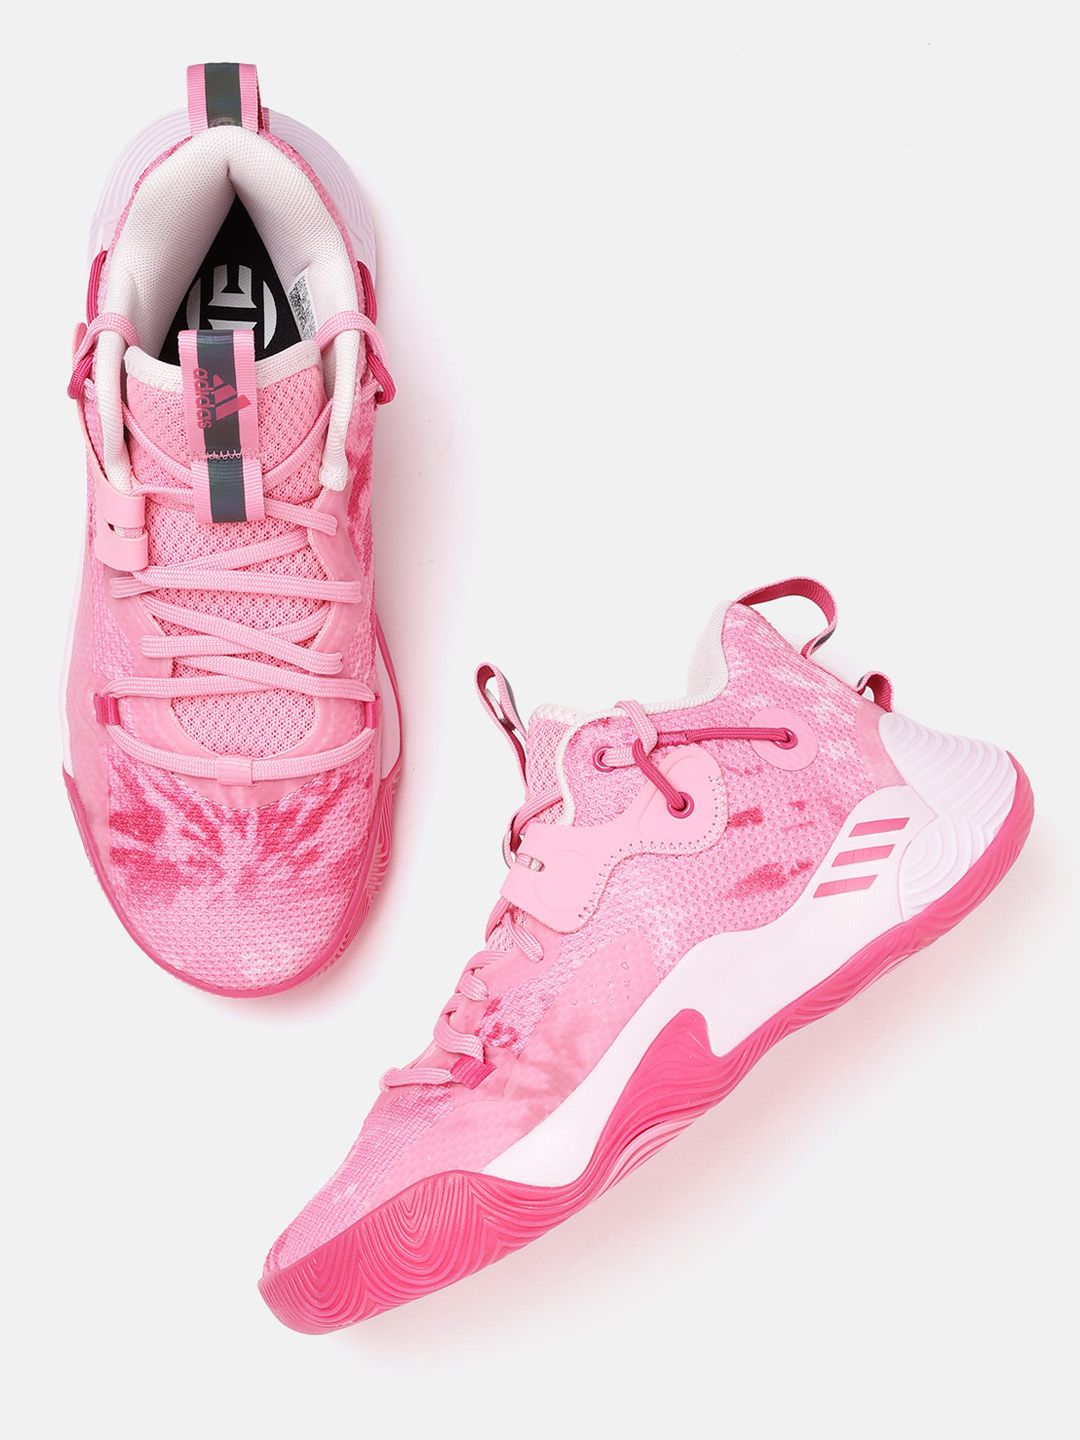 ADIDAS Unisex Pink Woven Design Harden Stepback 3 Basketball Shoes Price in India